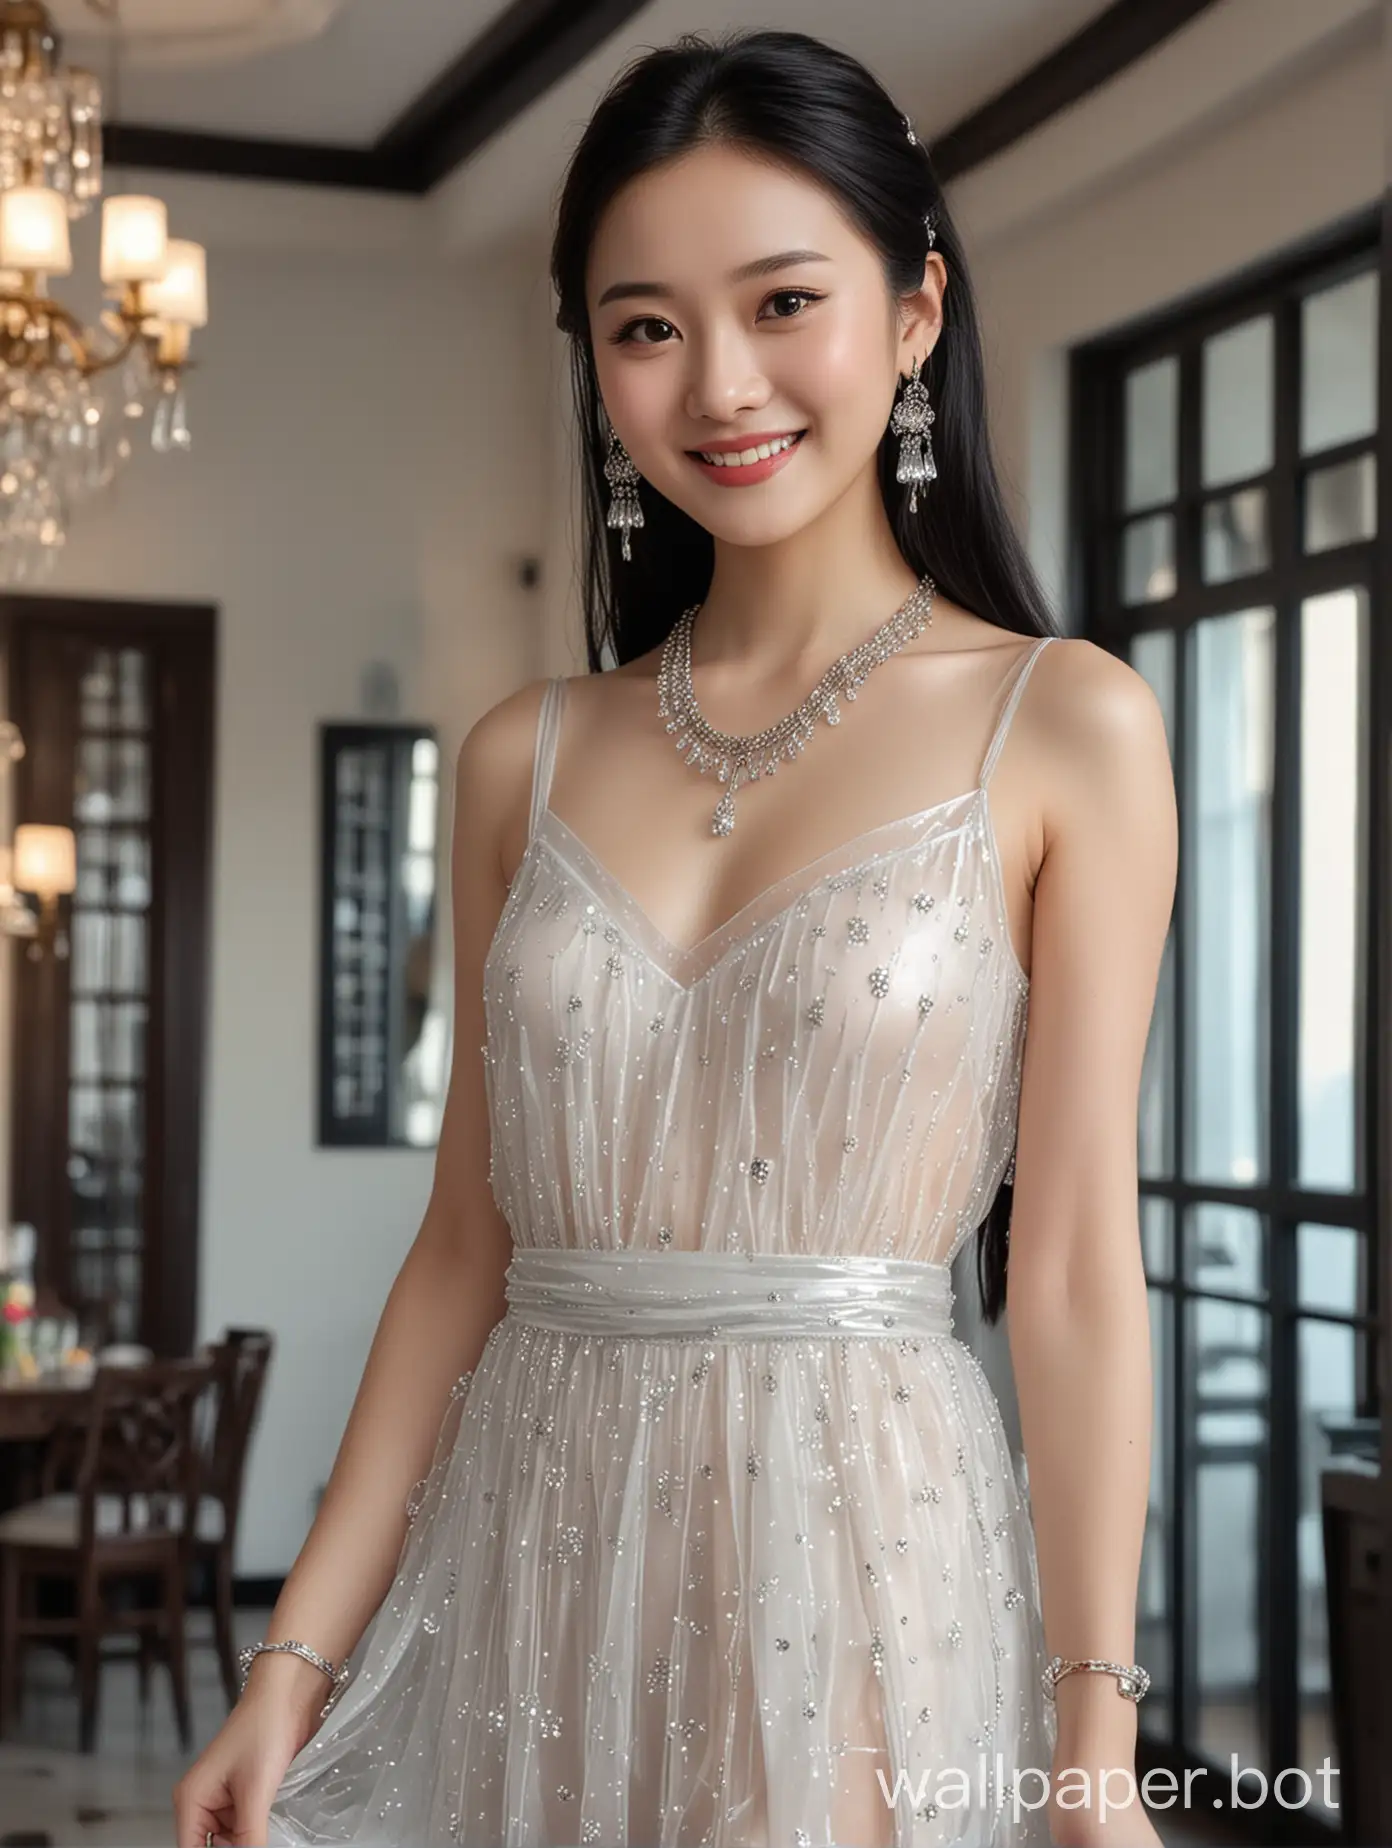 Elegant-Chinese-Actress-in-Translucent-Party-Dress-with-Jewelry-in-Modern-Interior-House-Setting